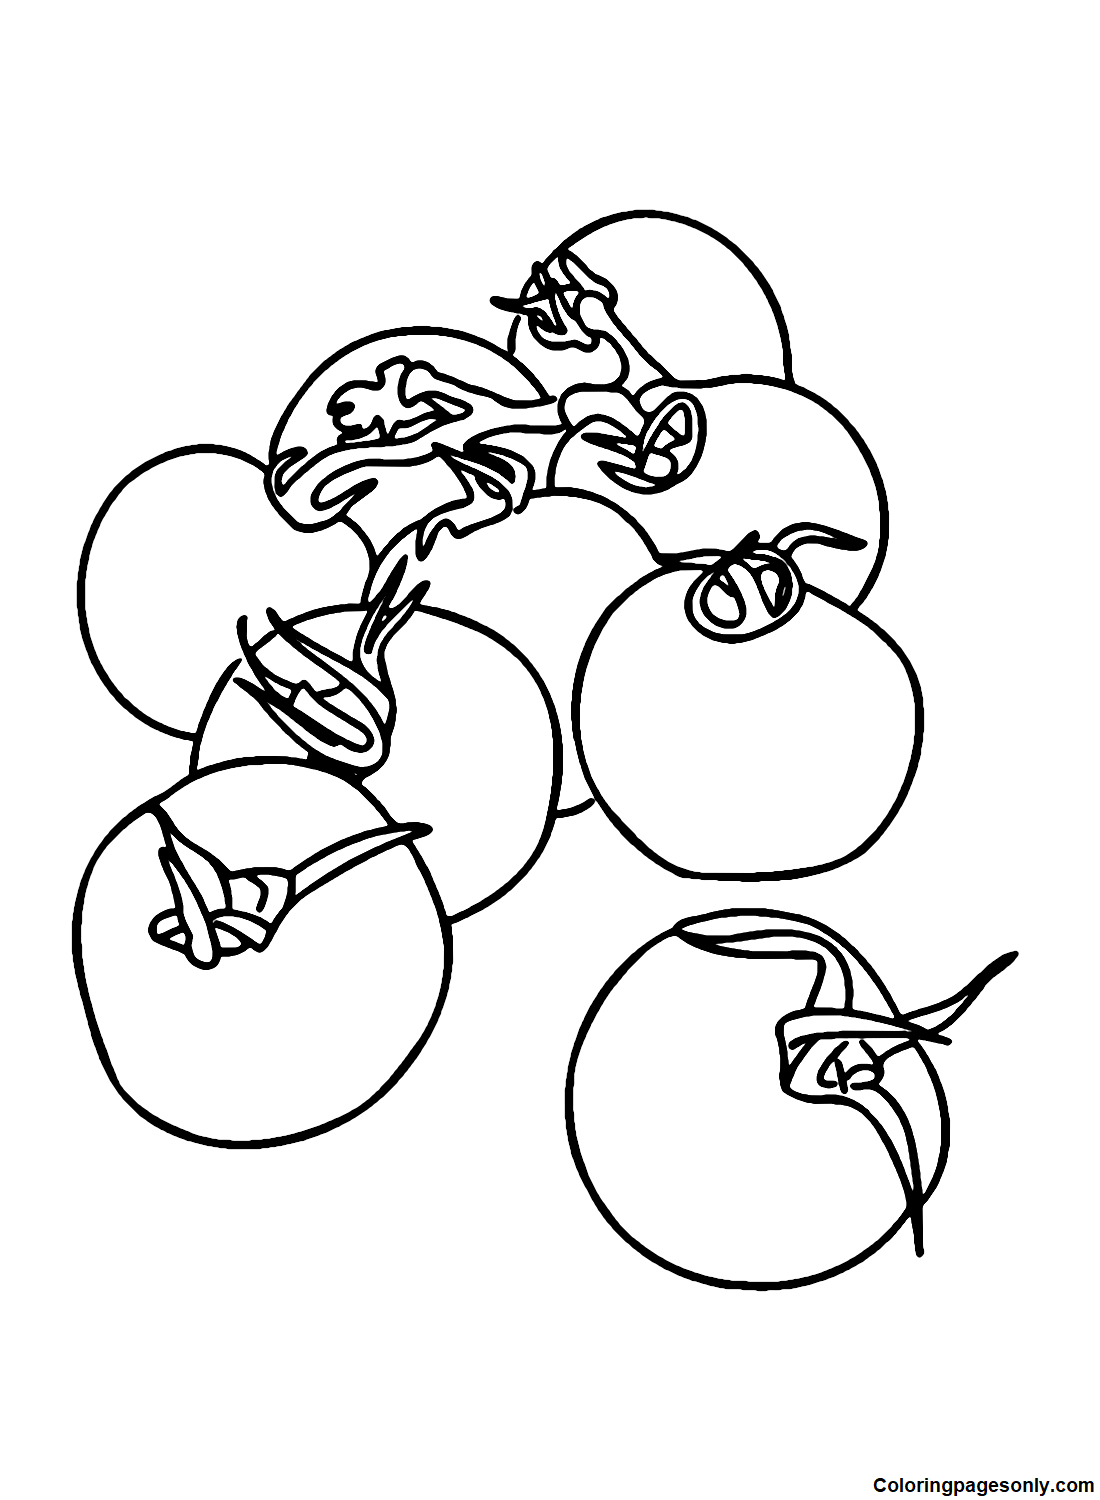 Printable Tomatoes Coloring Page